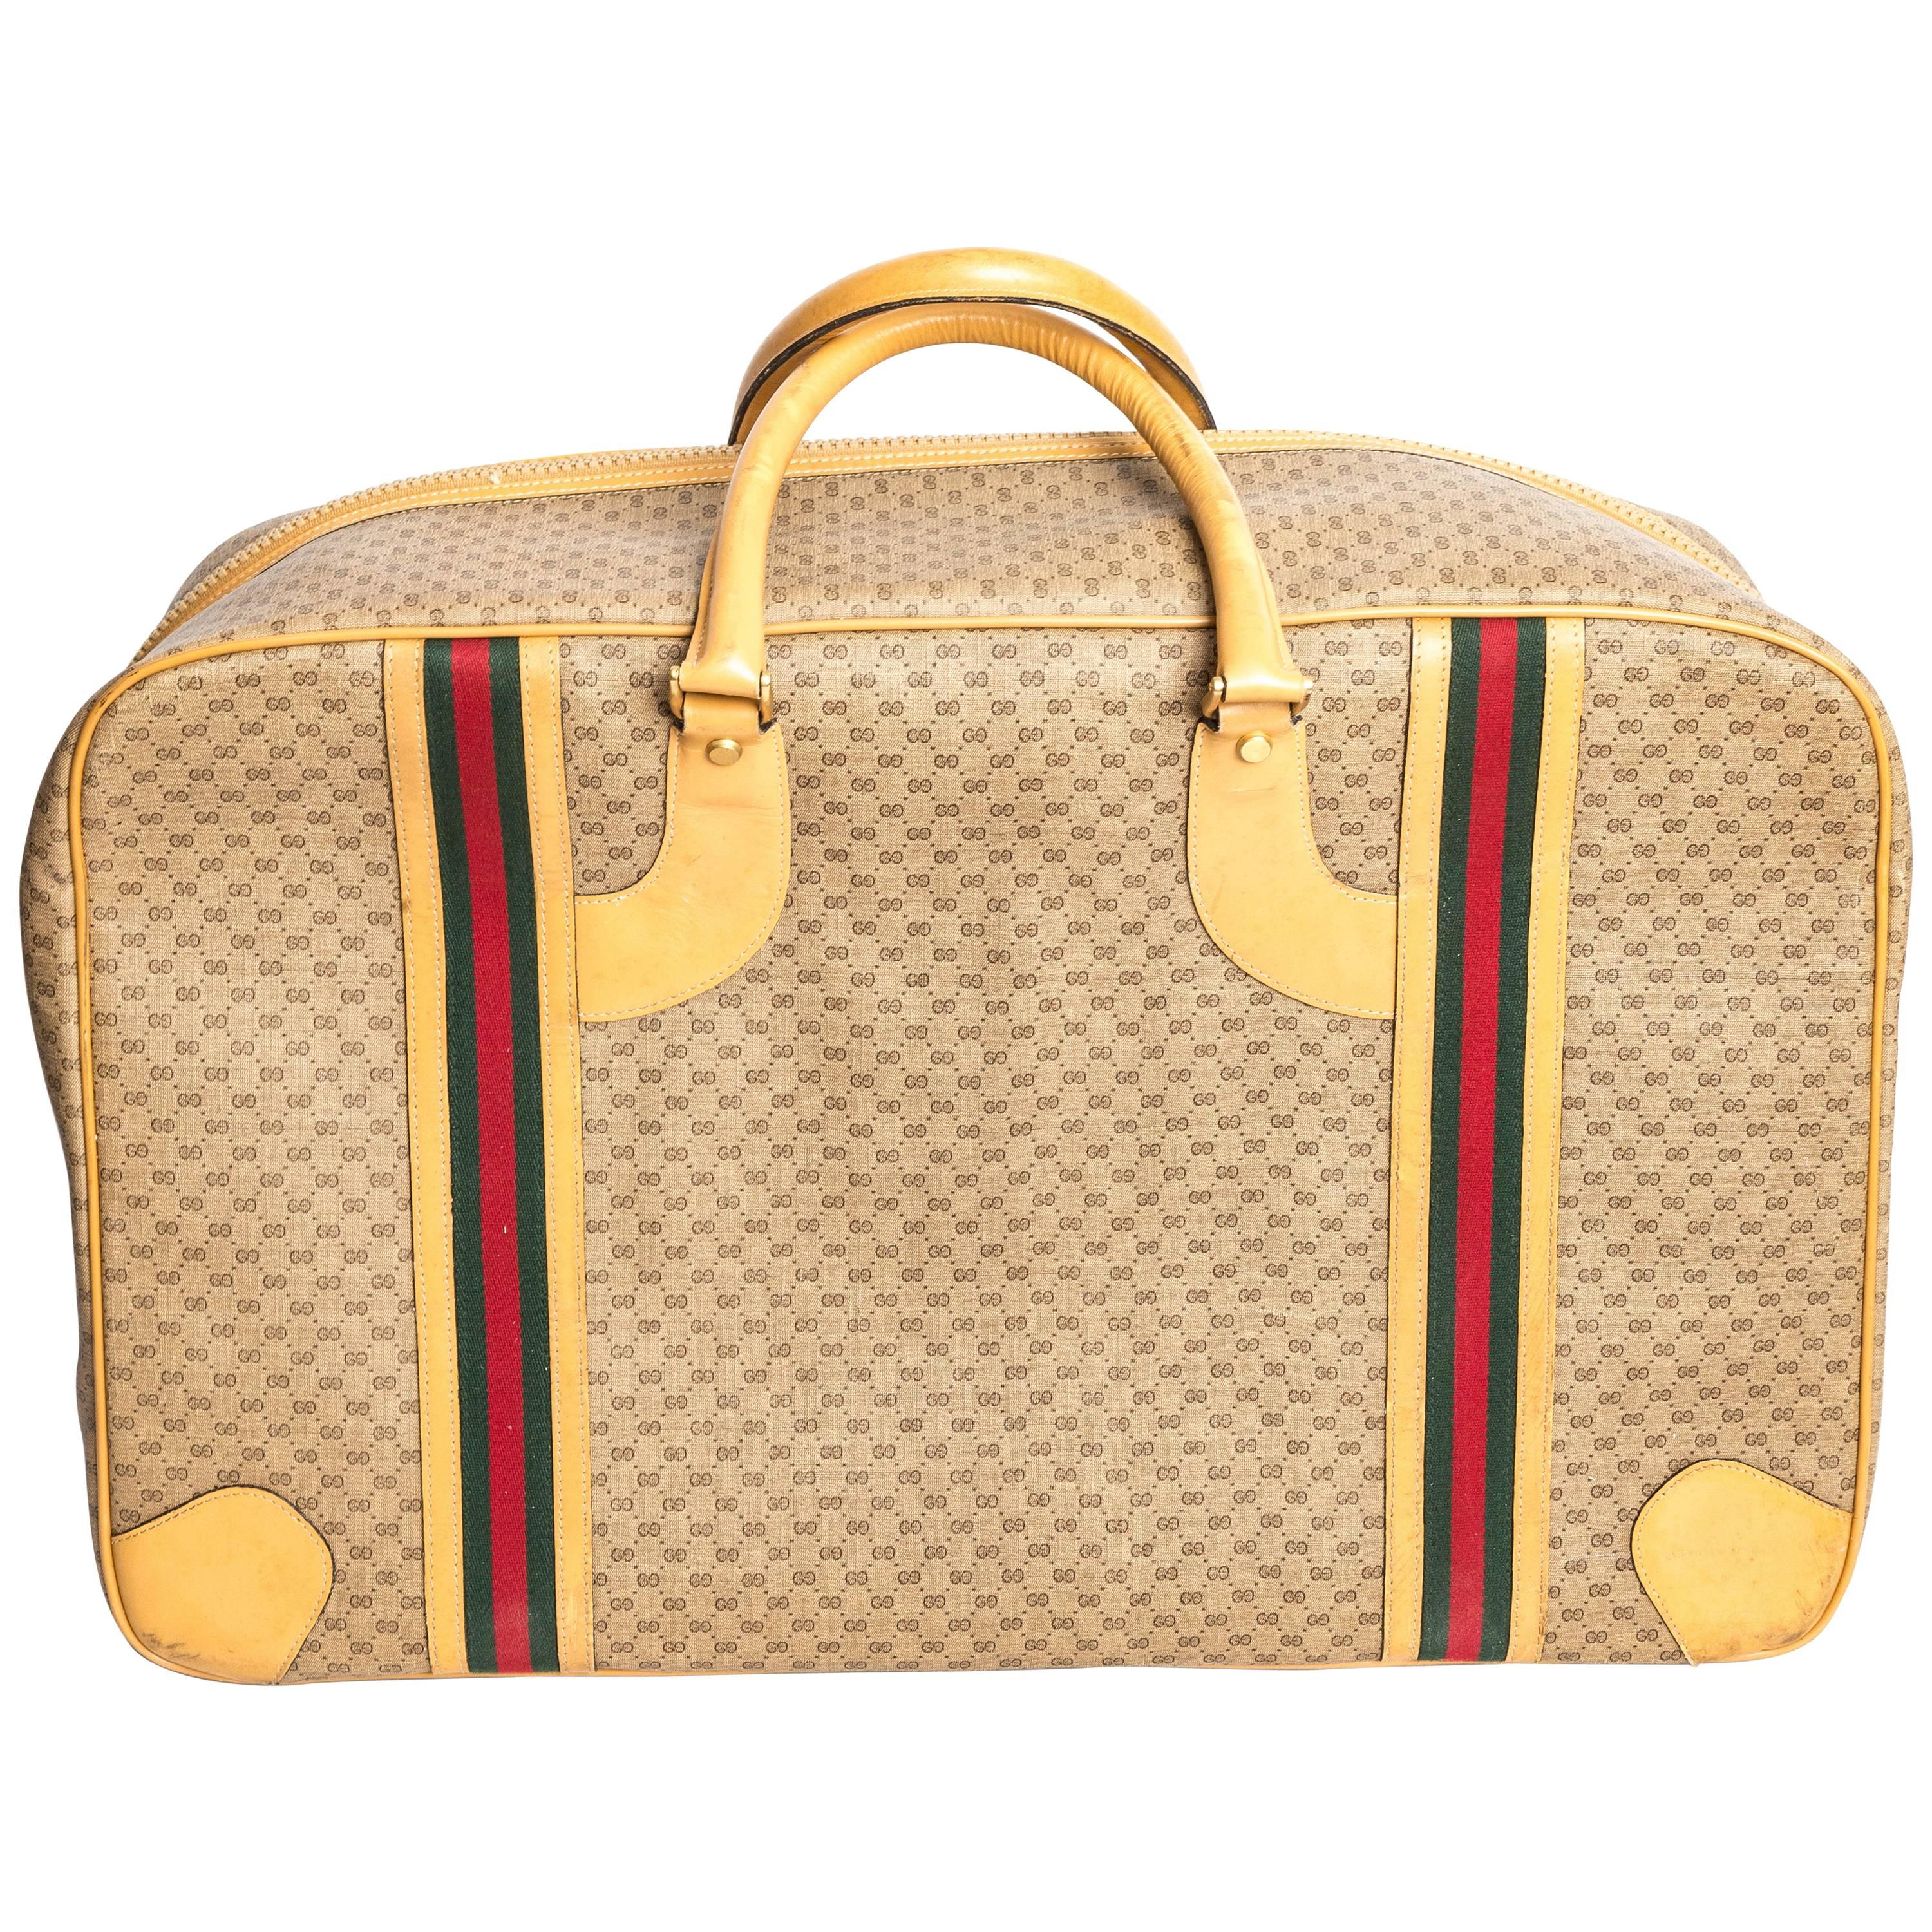 Gucci Soft Tan Monogram Suitcase With Heritage Stripe For Sale